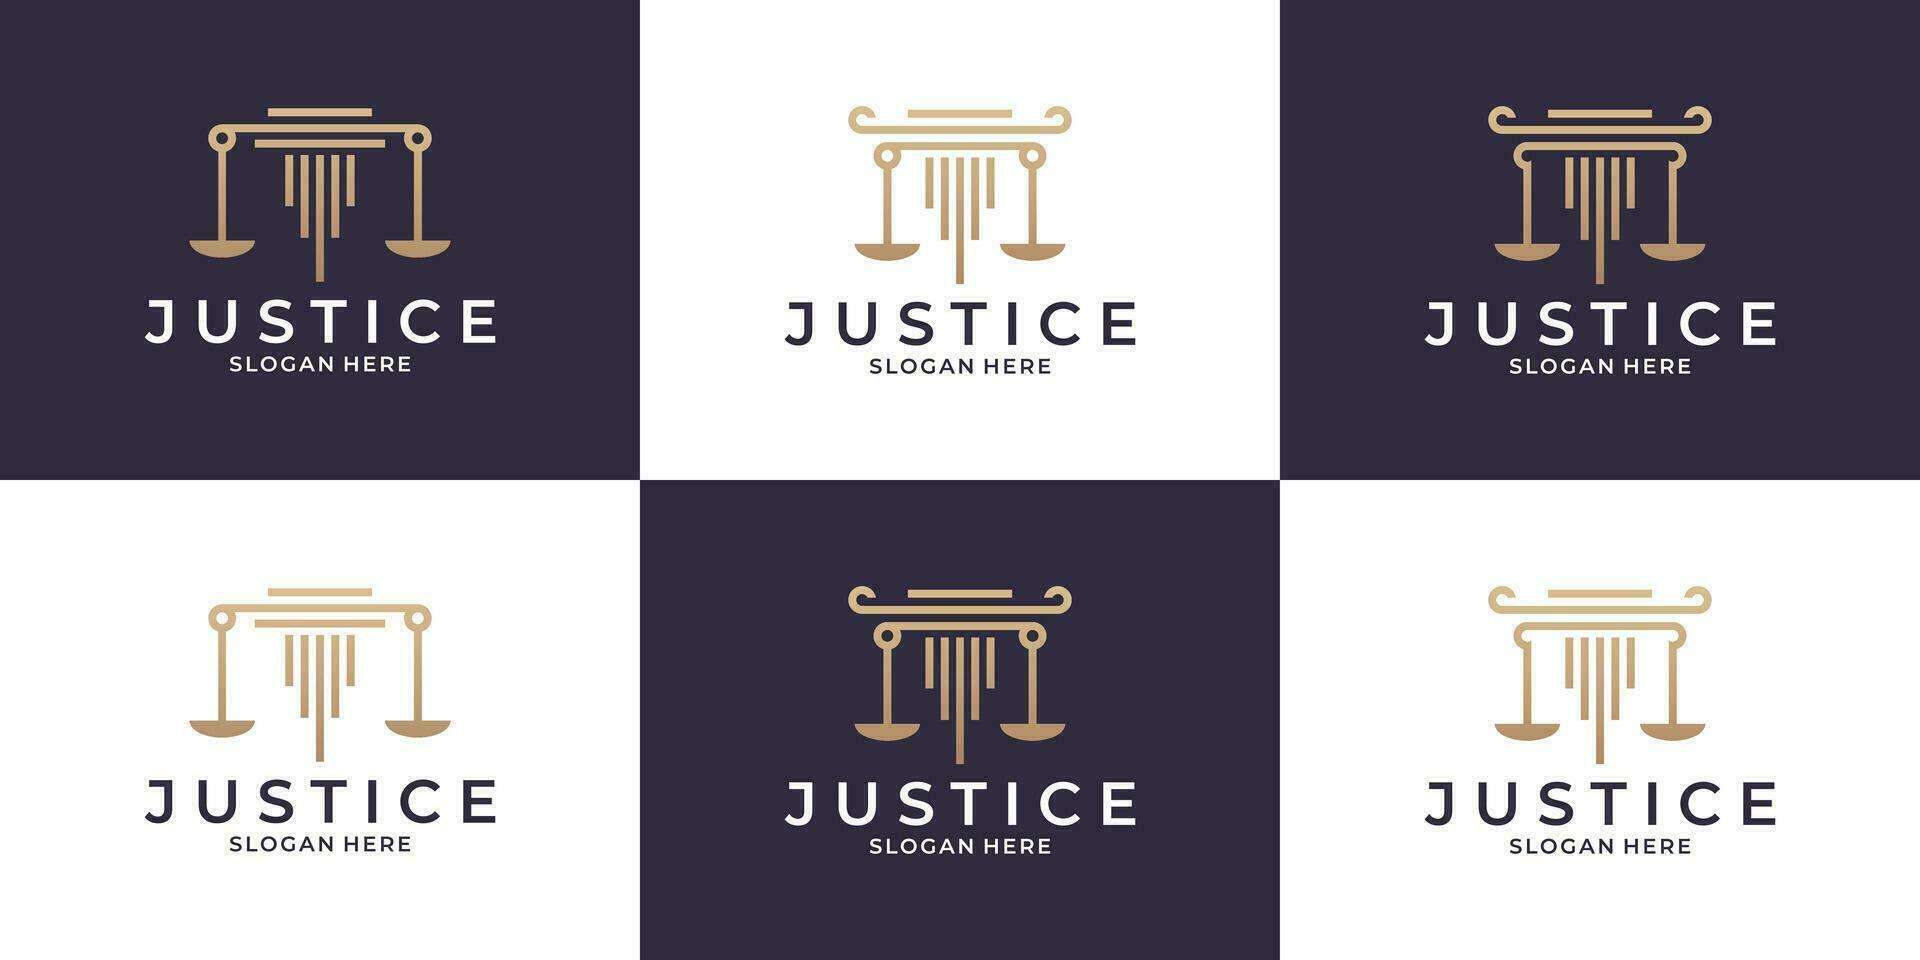 law firm, justice, law yer logo design collections vector